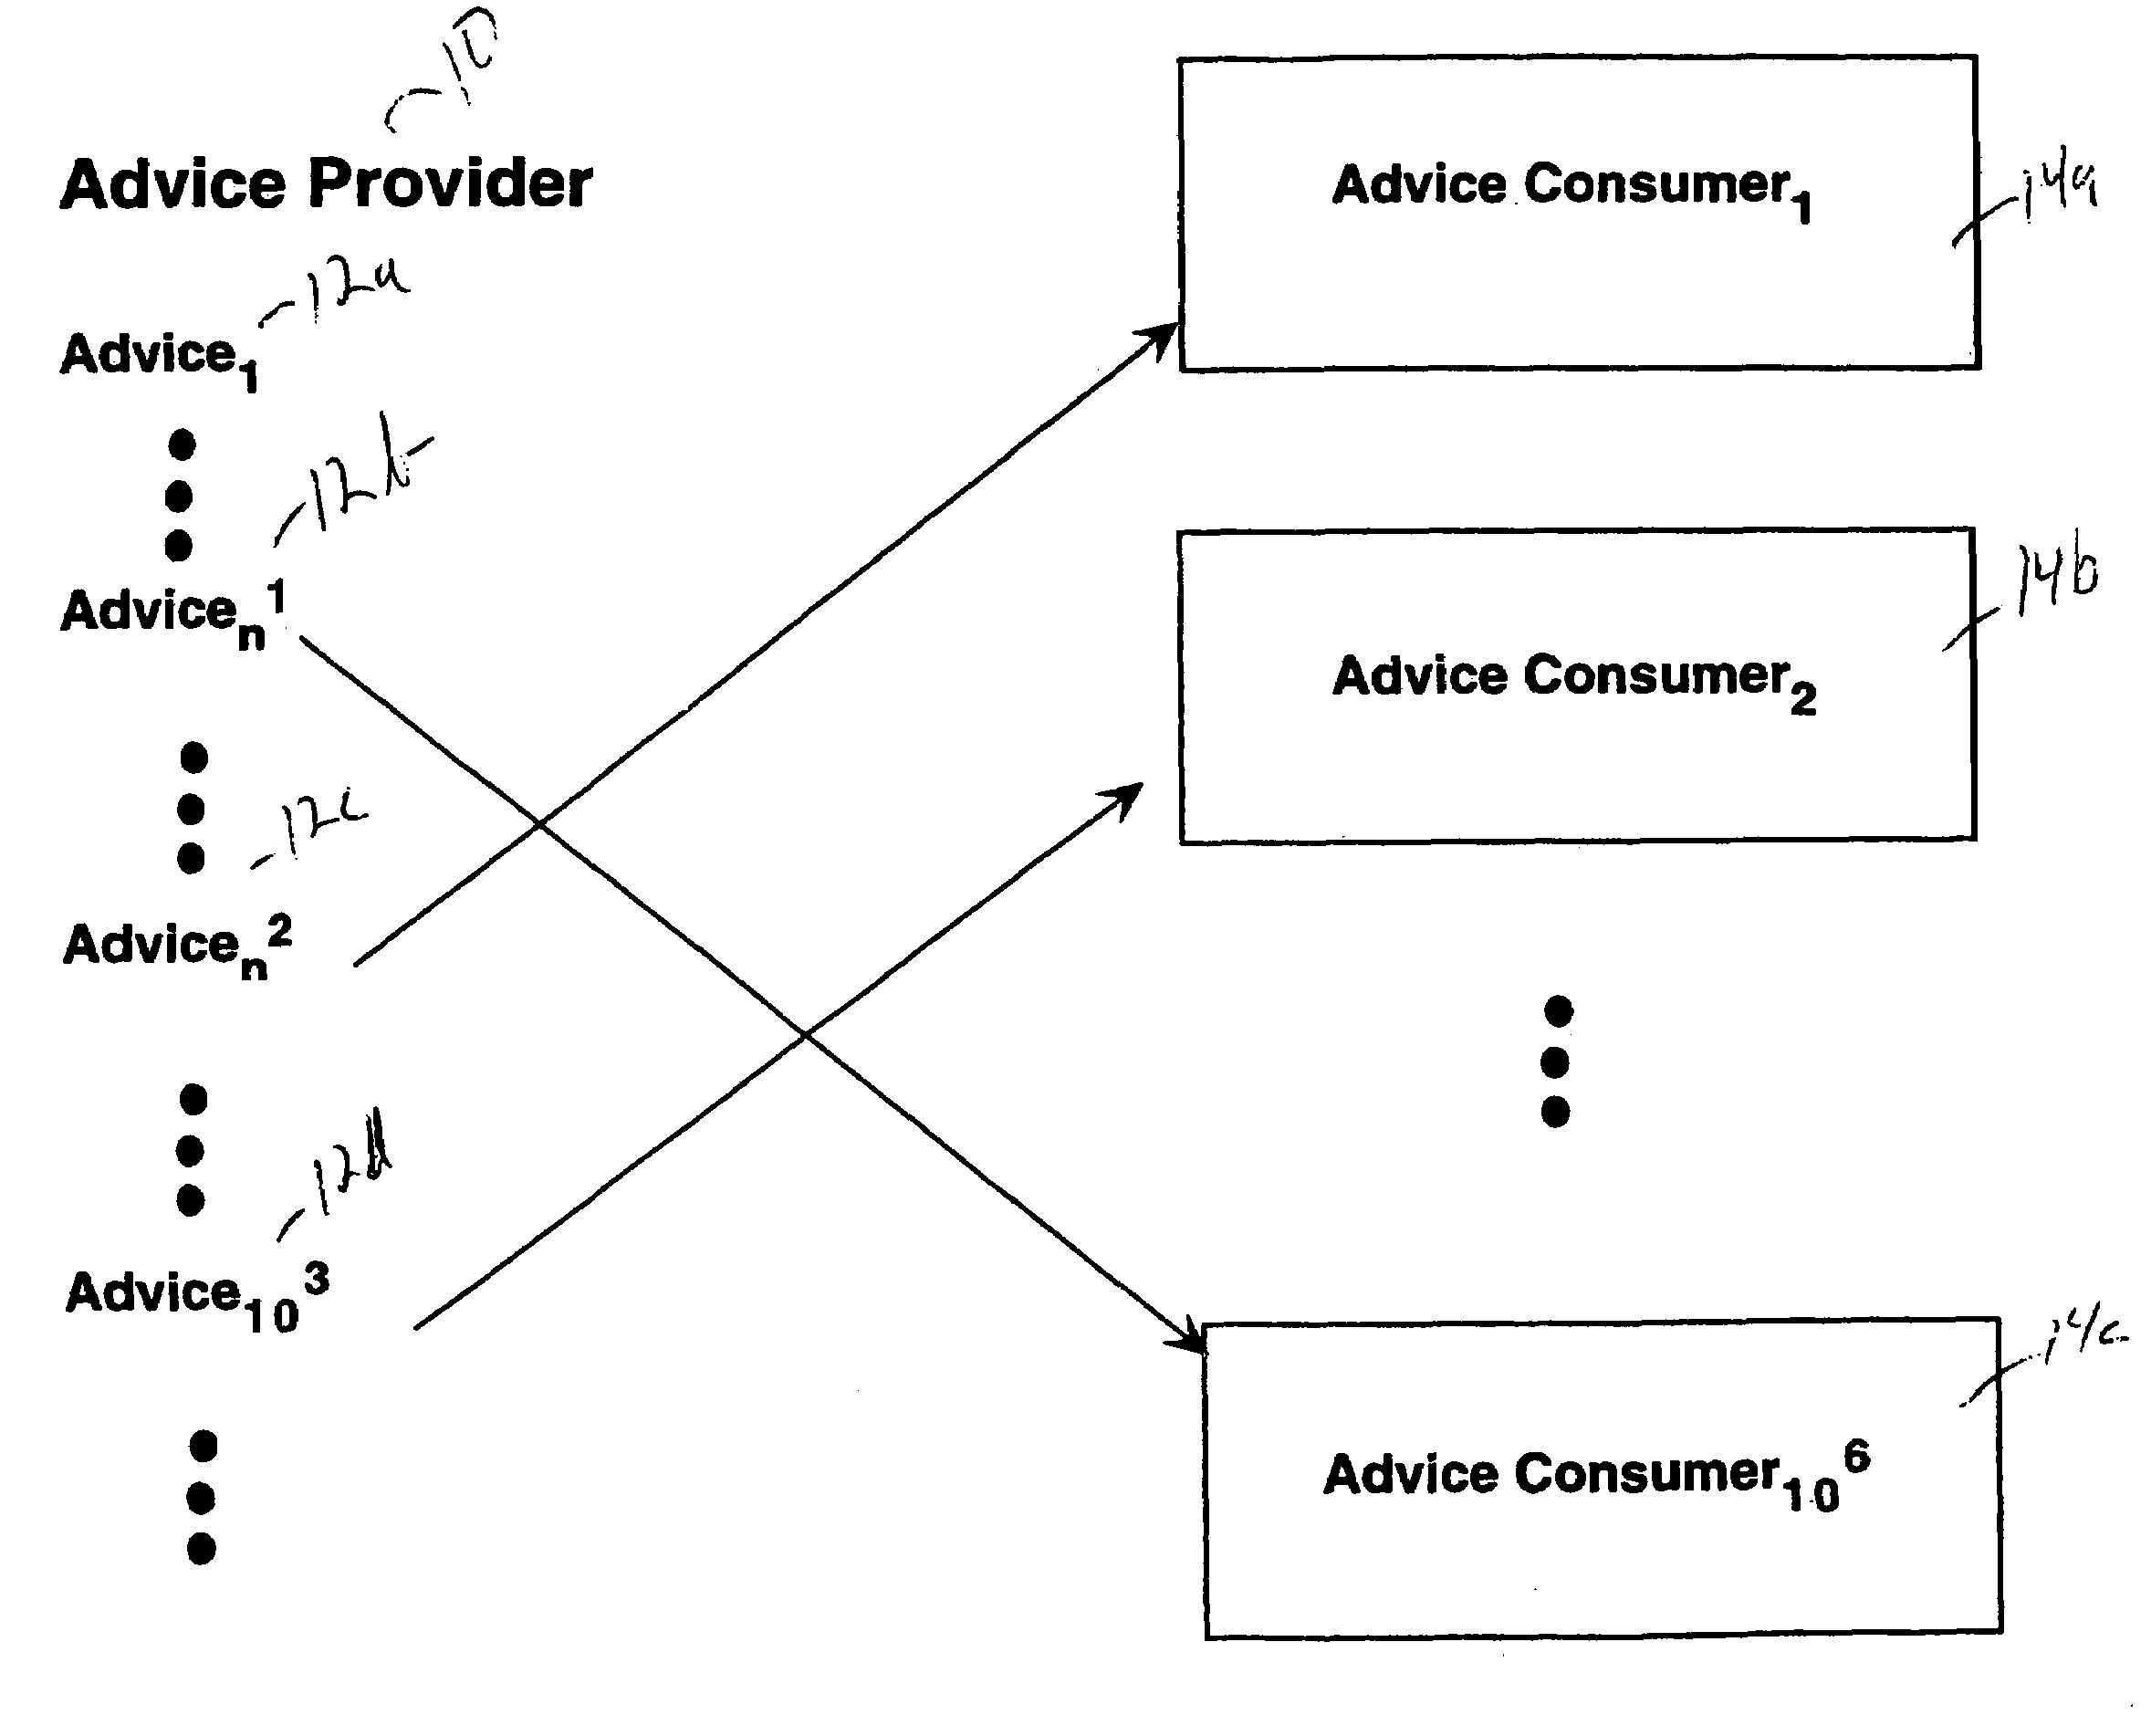 Relevance clause for computed relevance messaging